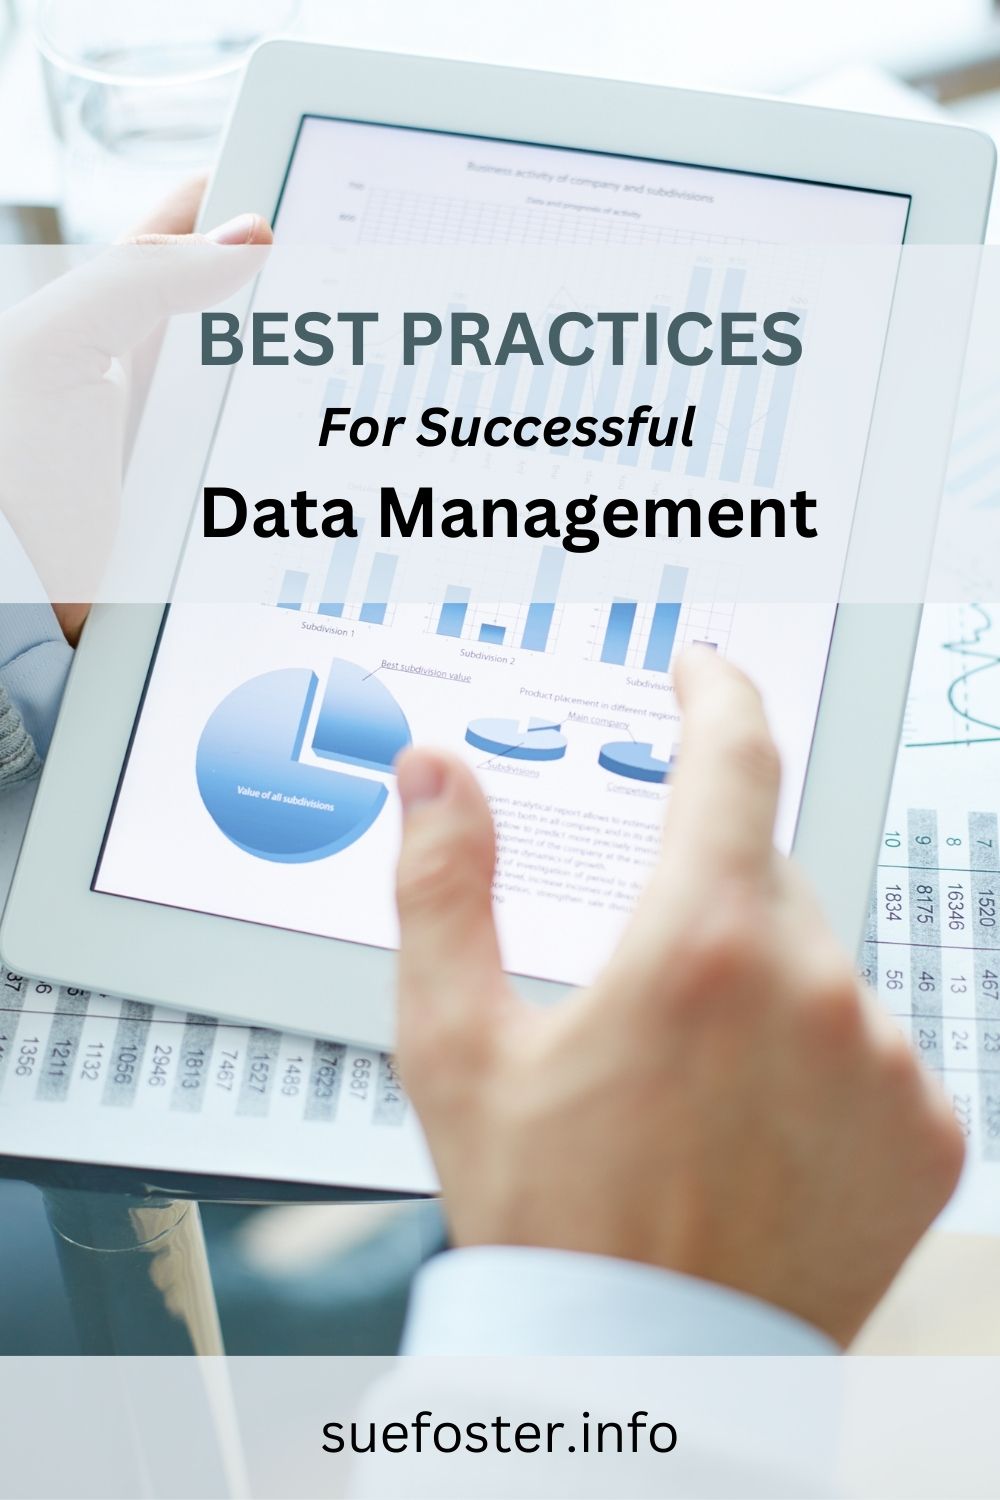 Learn how effective data management can enhance decision-making, efficiency, and cost savings in your business. Discover best practices, including setting clear data goals, selecting the right tools, creating a recovery plan, and prioritizing data security. With technology's growing influence, master data management for success.